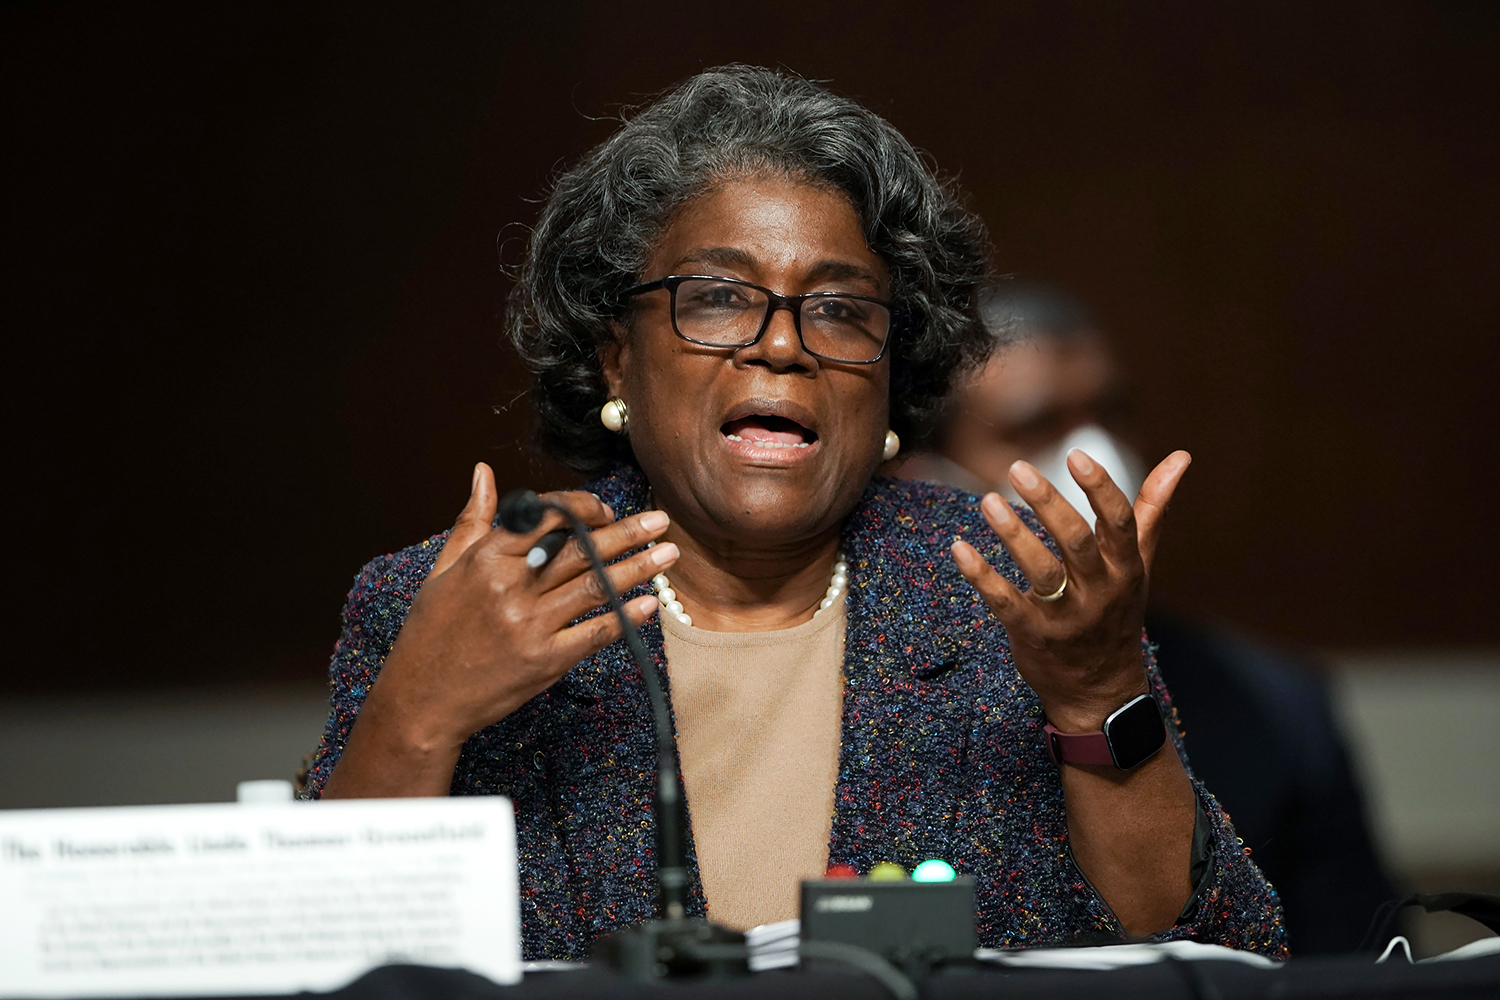 Senate Foreign Relations Committee Examines Nomination Of Linda Thomas-Greenfield For UN Ambassador